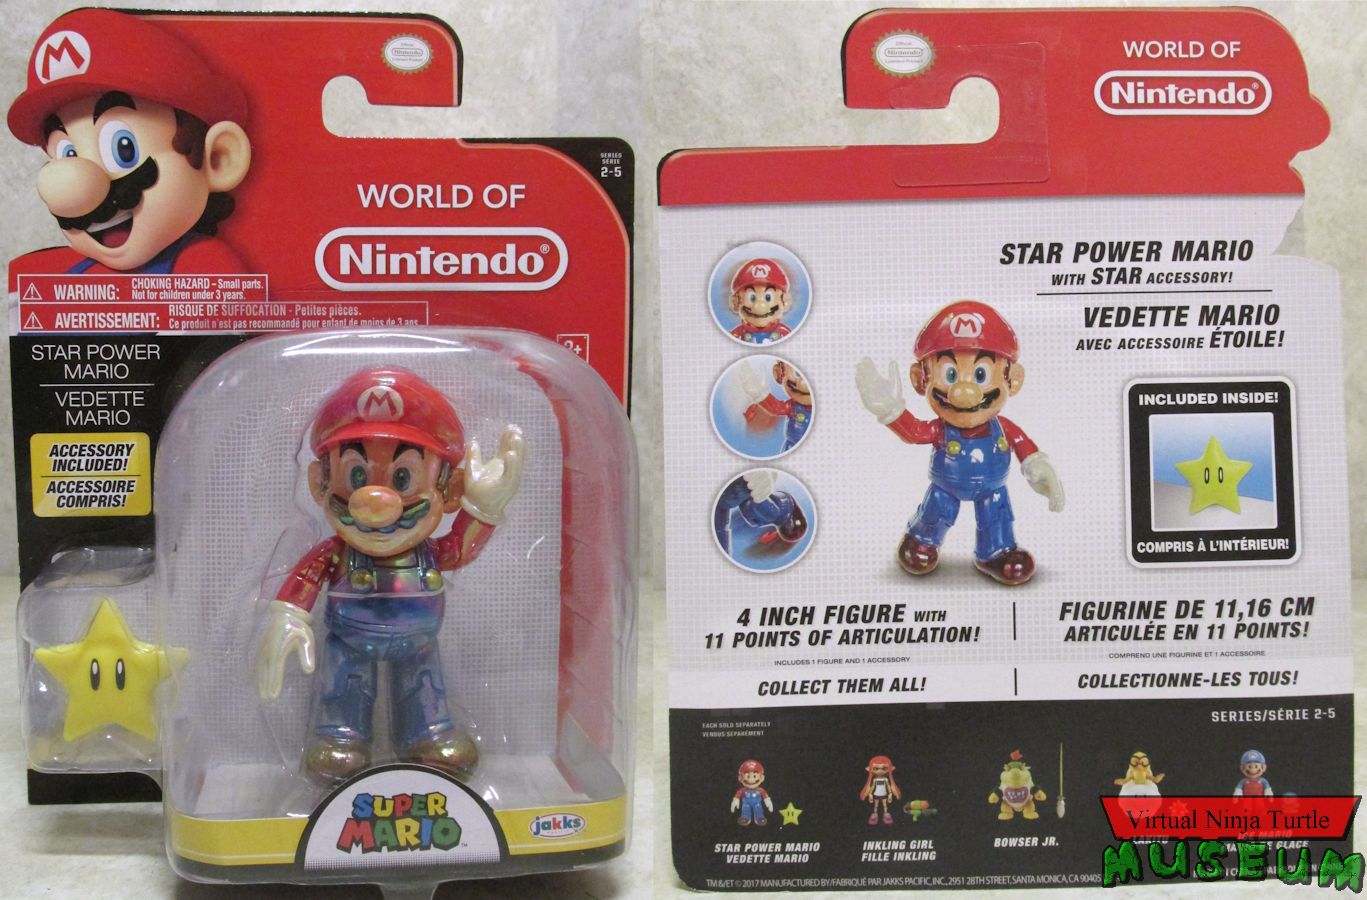 Star Power Mario packagin front and back